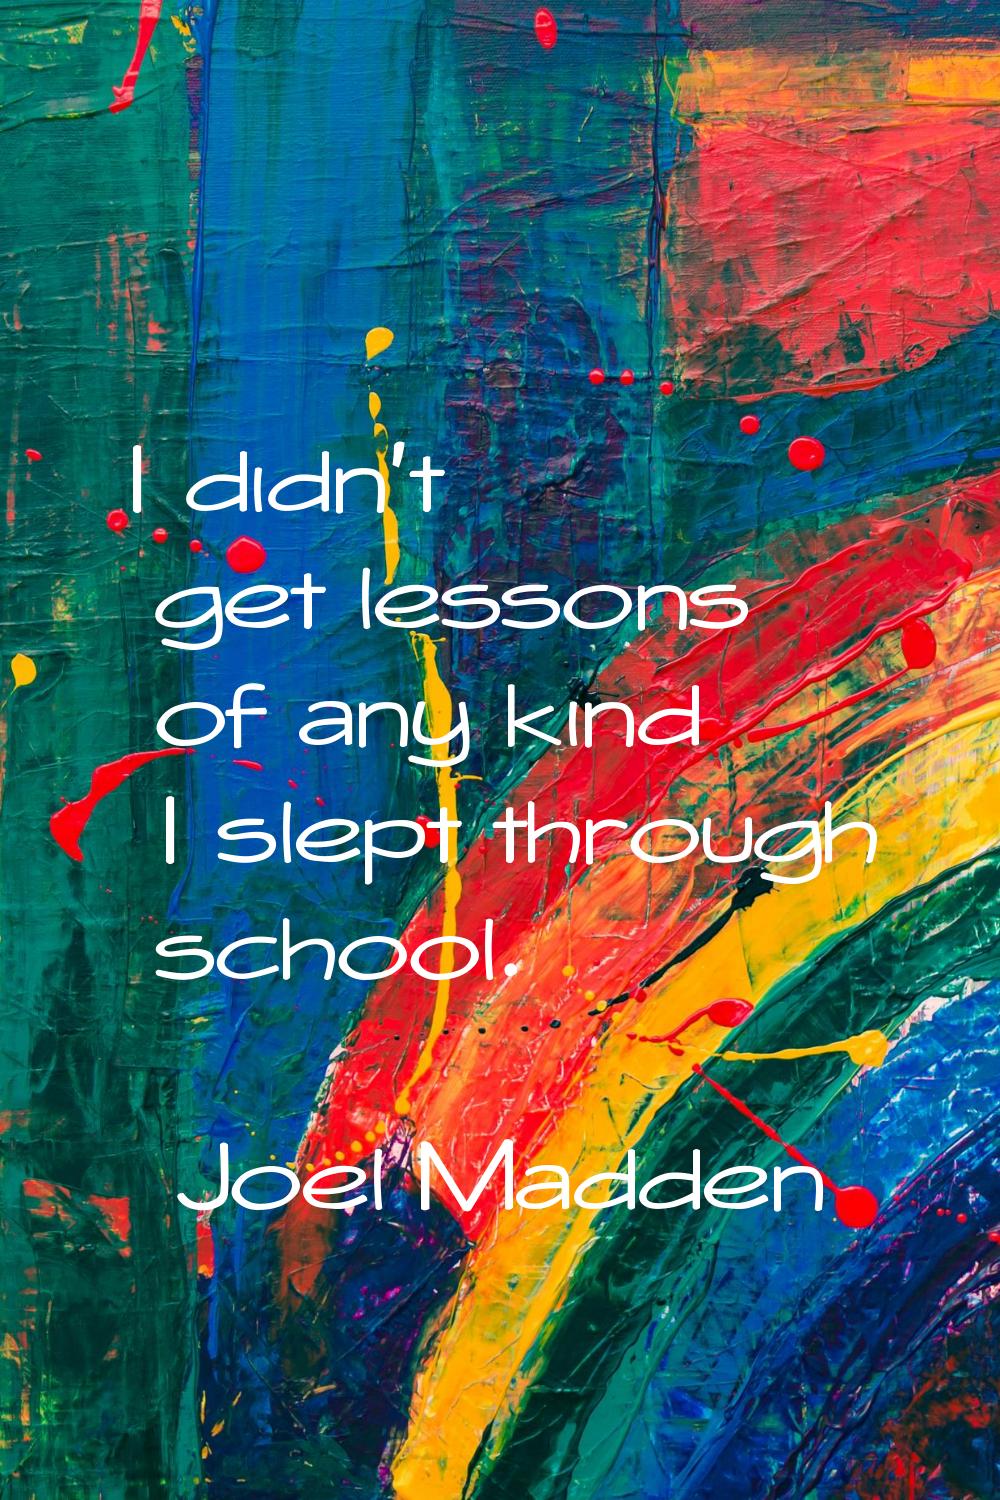 I didn't get lessons of any kind I slept through school.